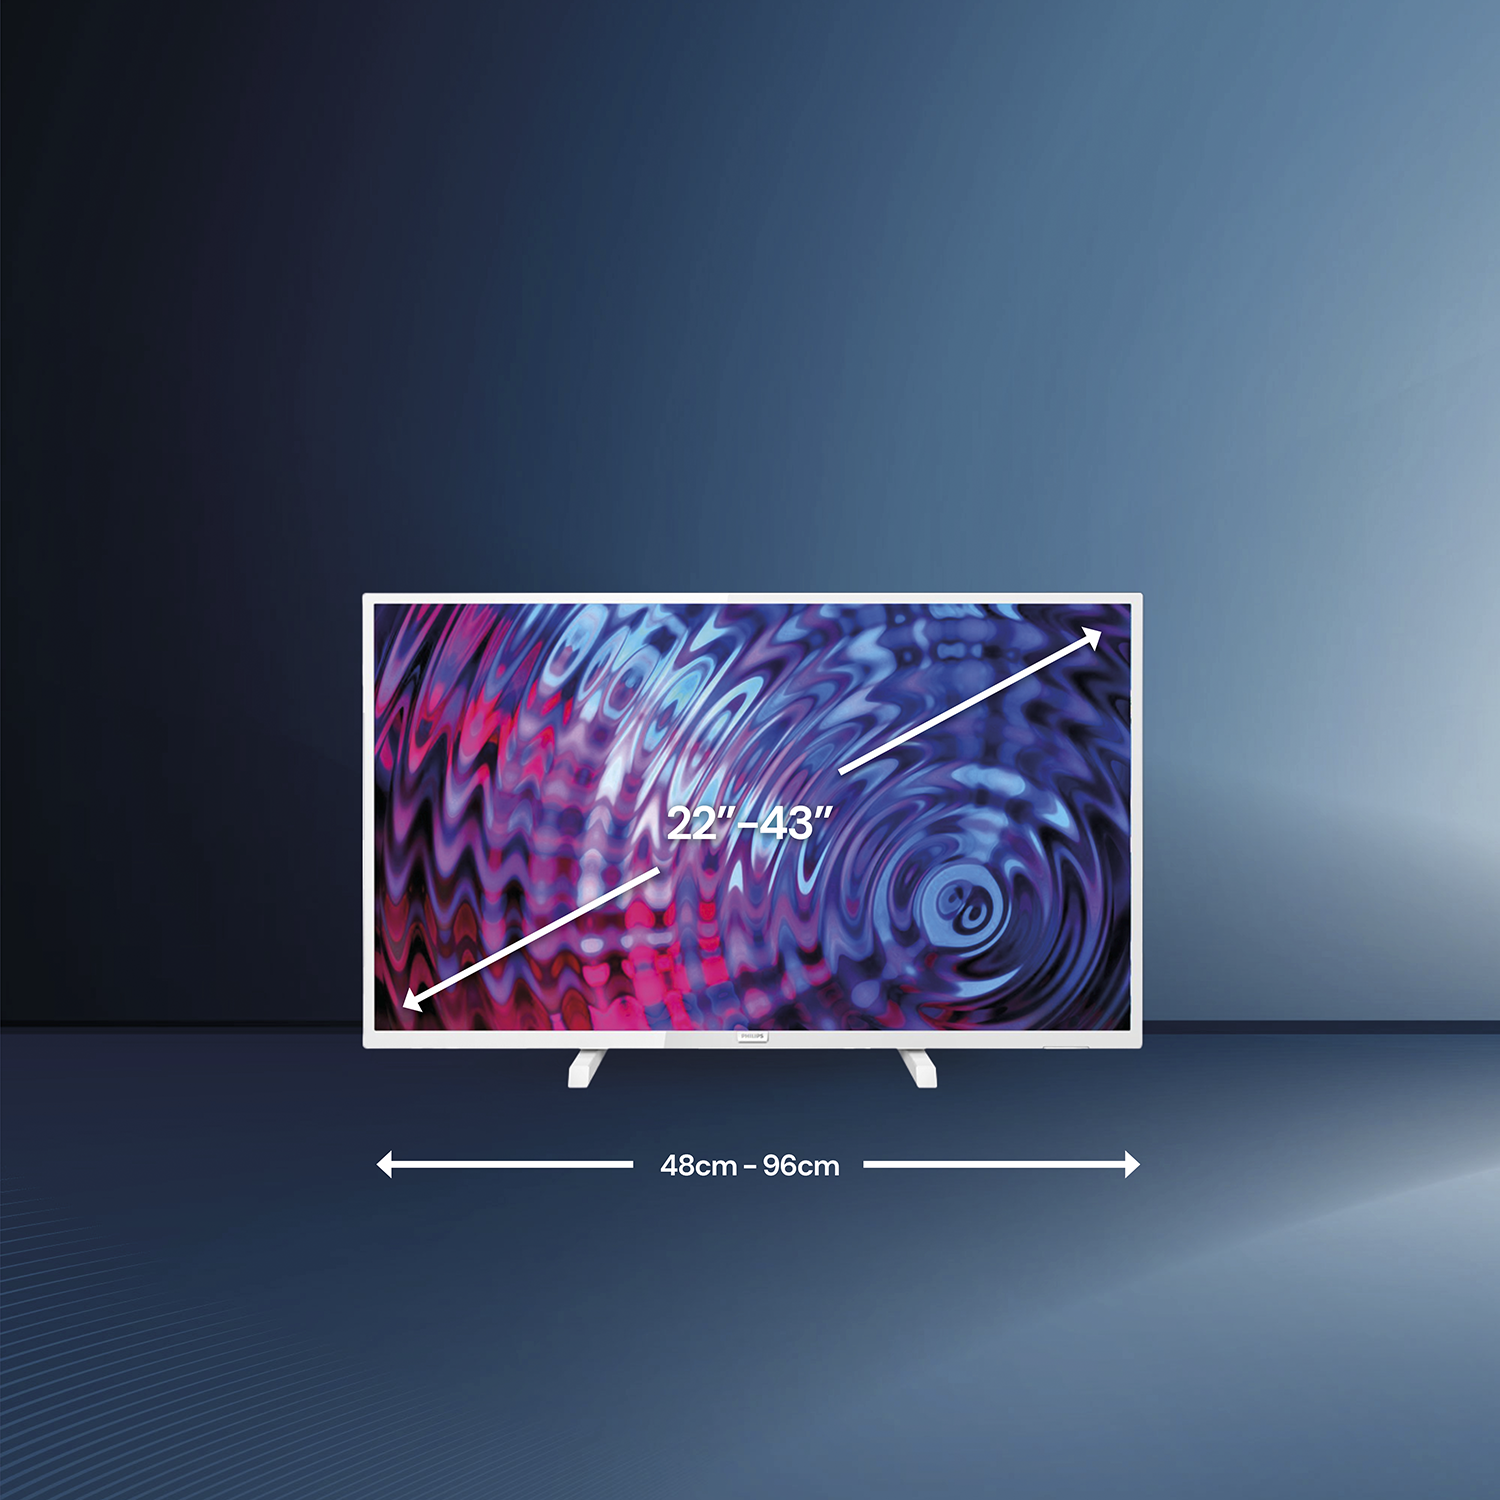 Philips Tv by size view